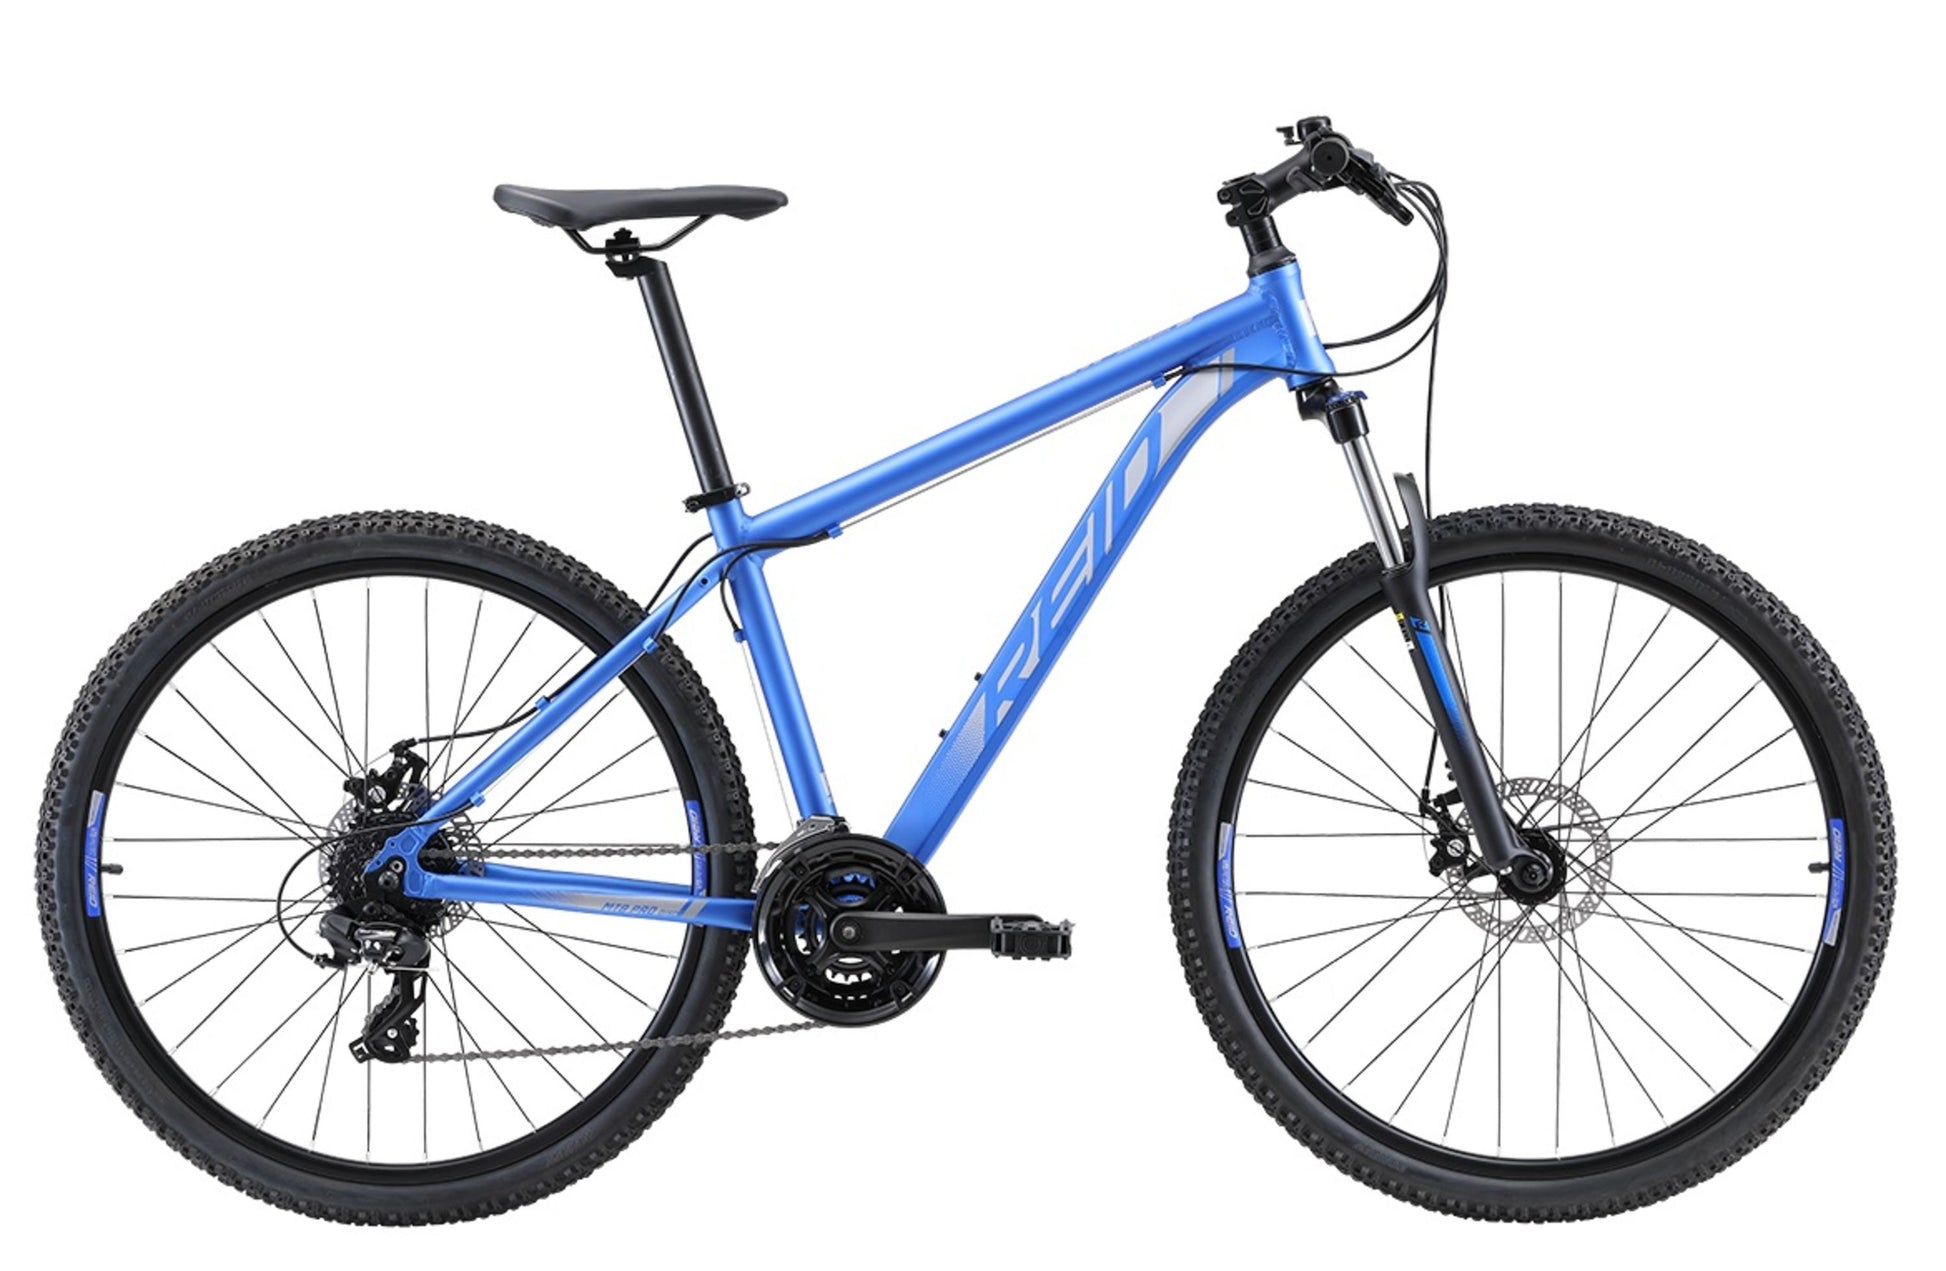 The MTB Pro 27.5" Disc Mountain Bike in Matte Blue with Shimano 8-speed gearing from Reid Cycles Australia